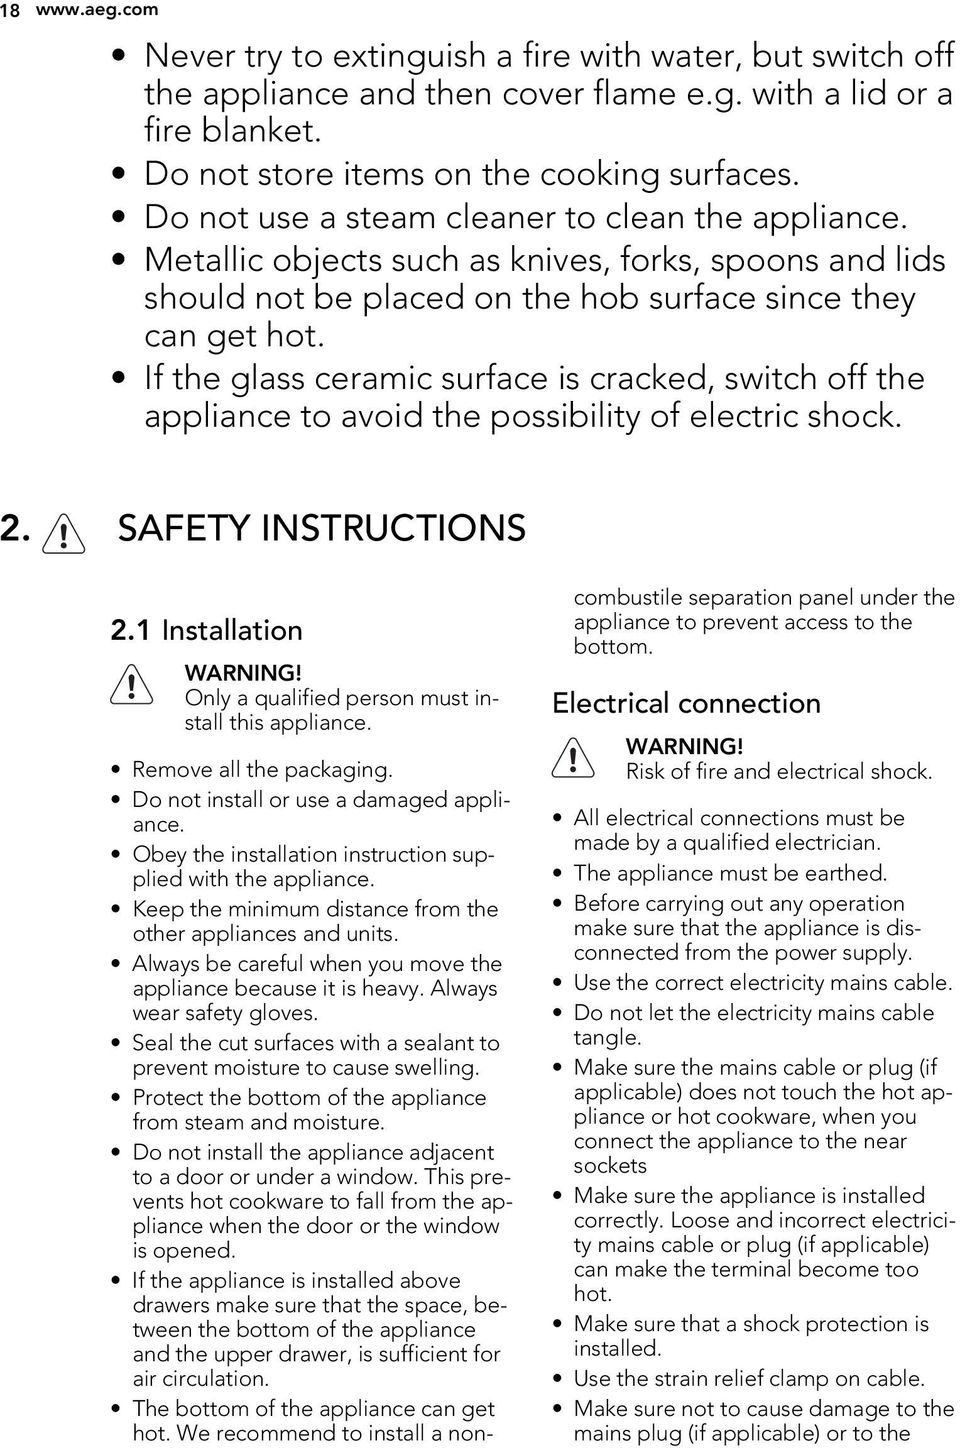 If the glass ceramic surface is cracked, switch off the appliance to avoid the possibility of electric shock. 2. SAFETY INSTRUCTIONS 2.1 Installation WARNING!